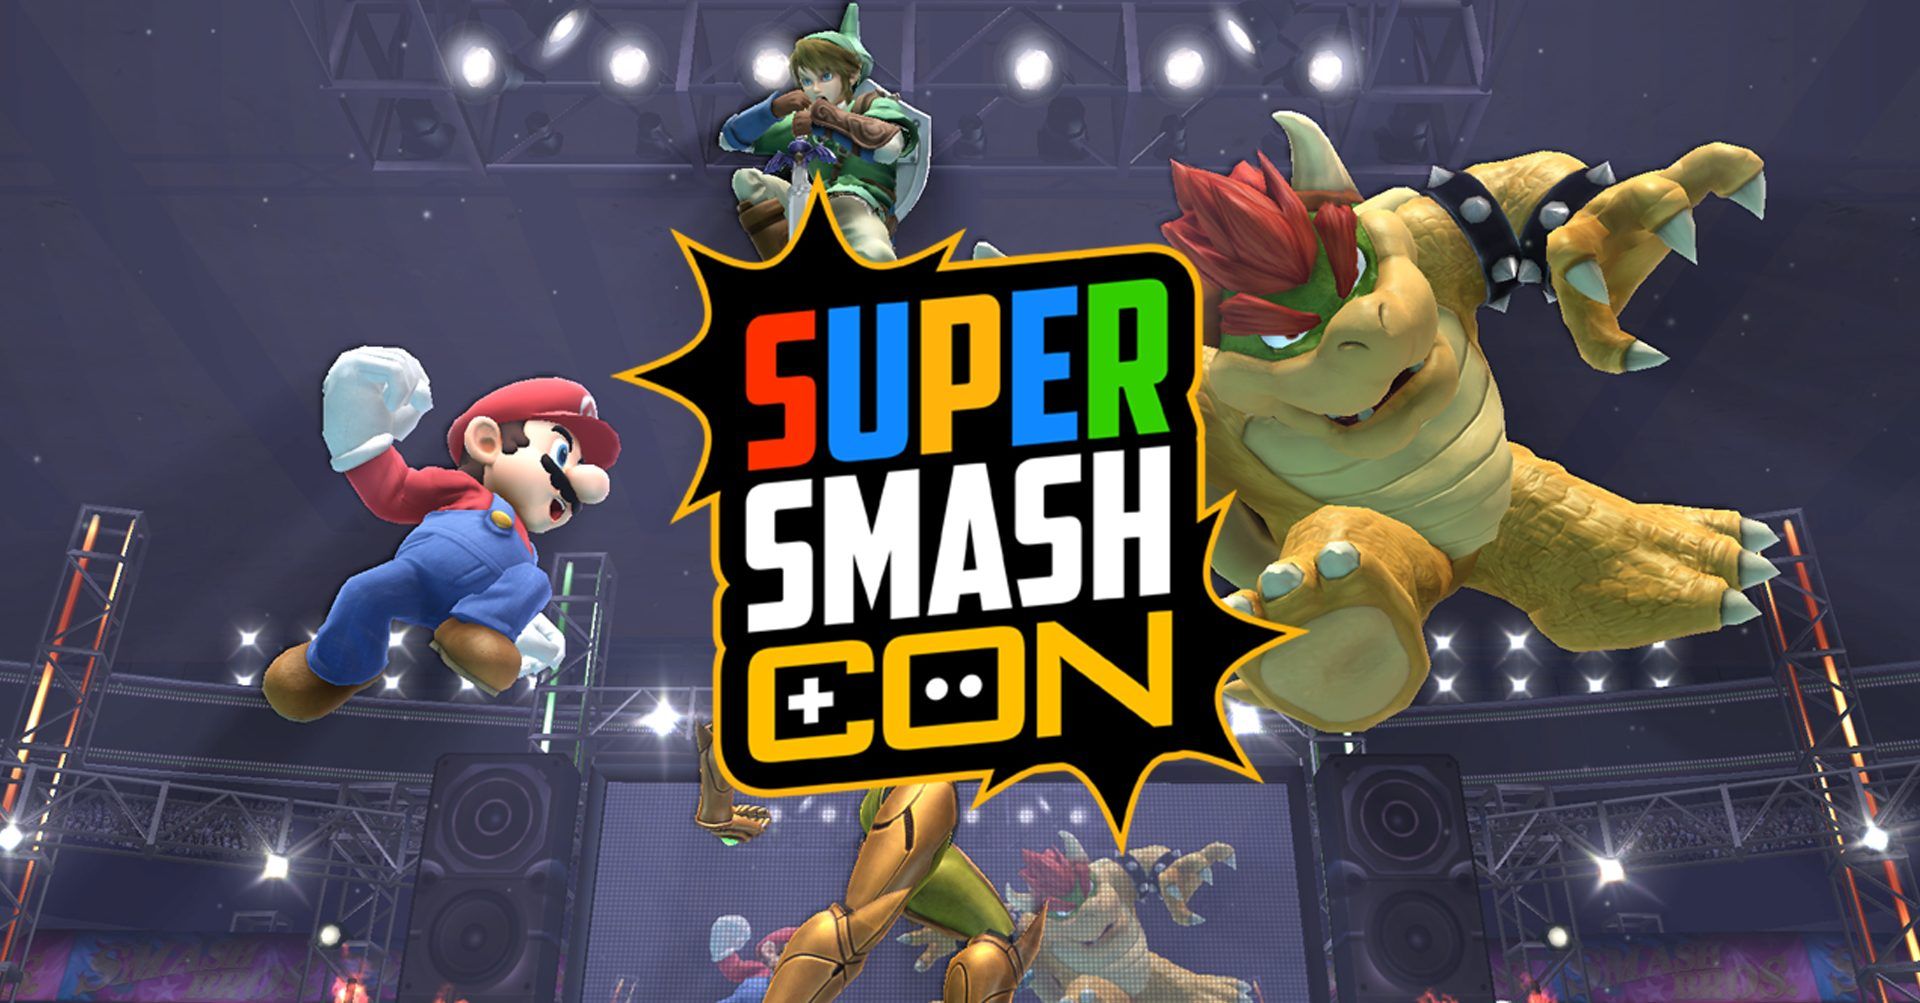 Super Smash Con Bans Osiris197 Due To History Of Violence And Harassment